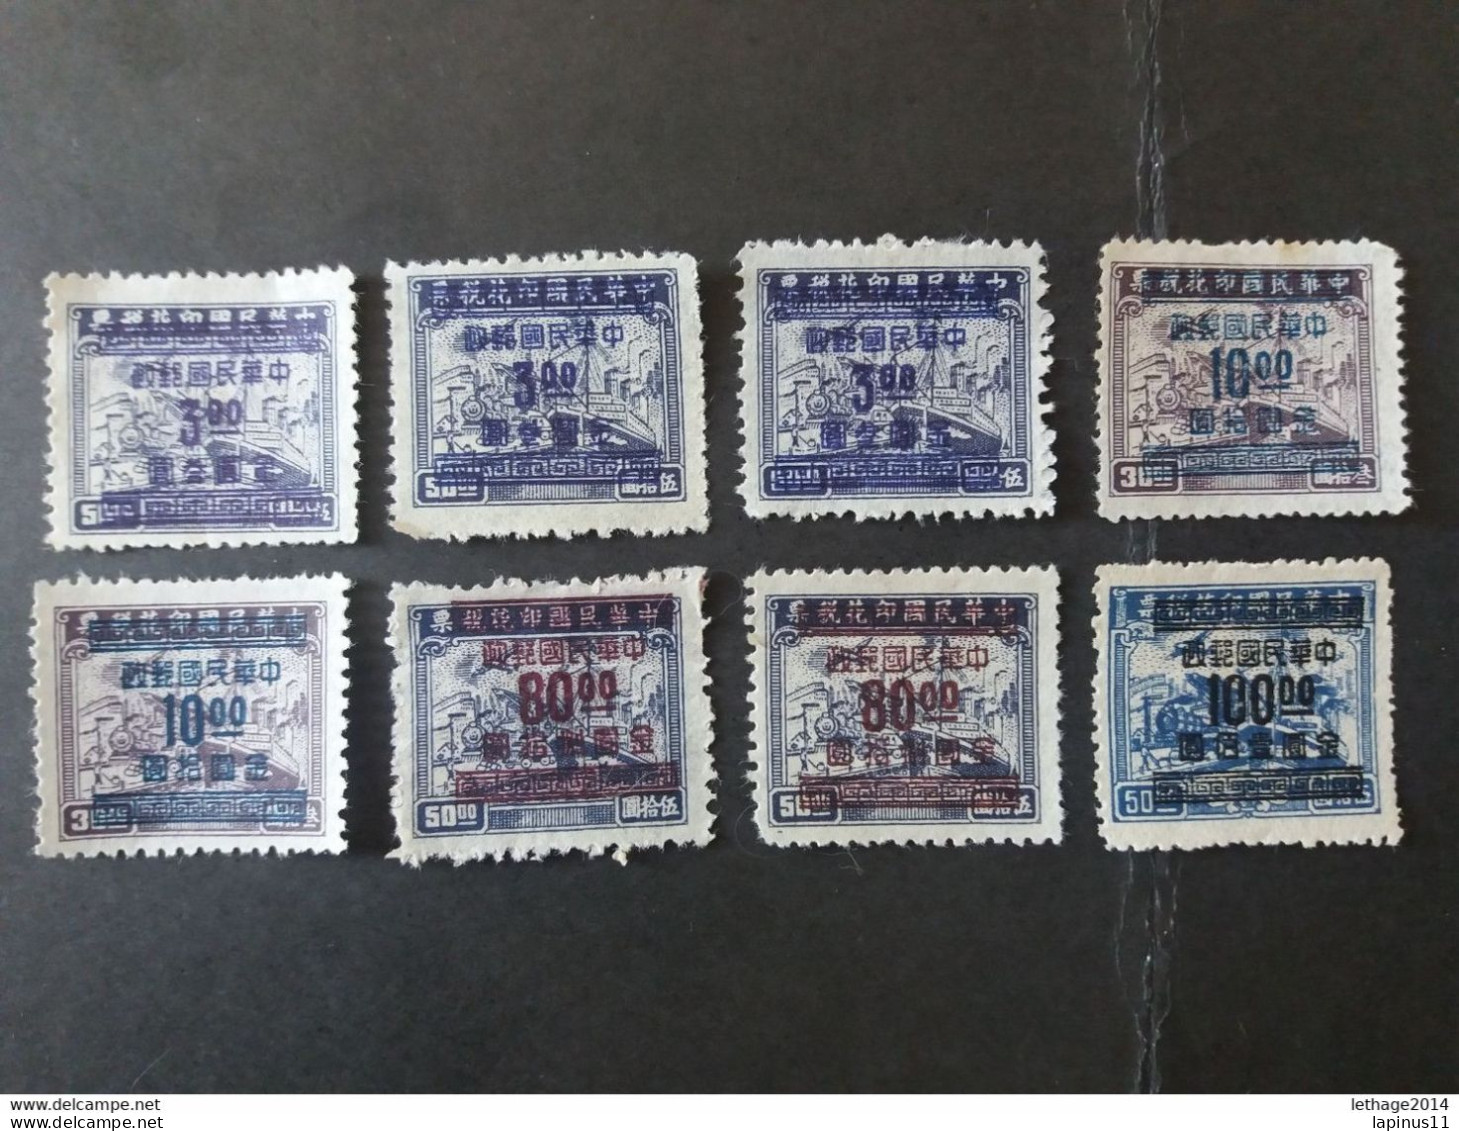 CHINE 中國 CHINA 1949 Revenue Stamps Surcharged - 1912-1949 Republiek